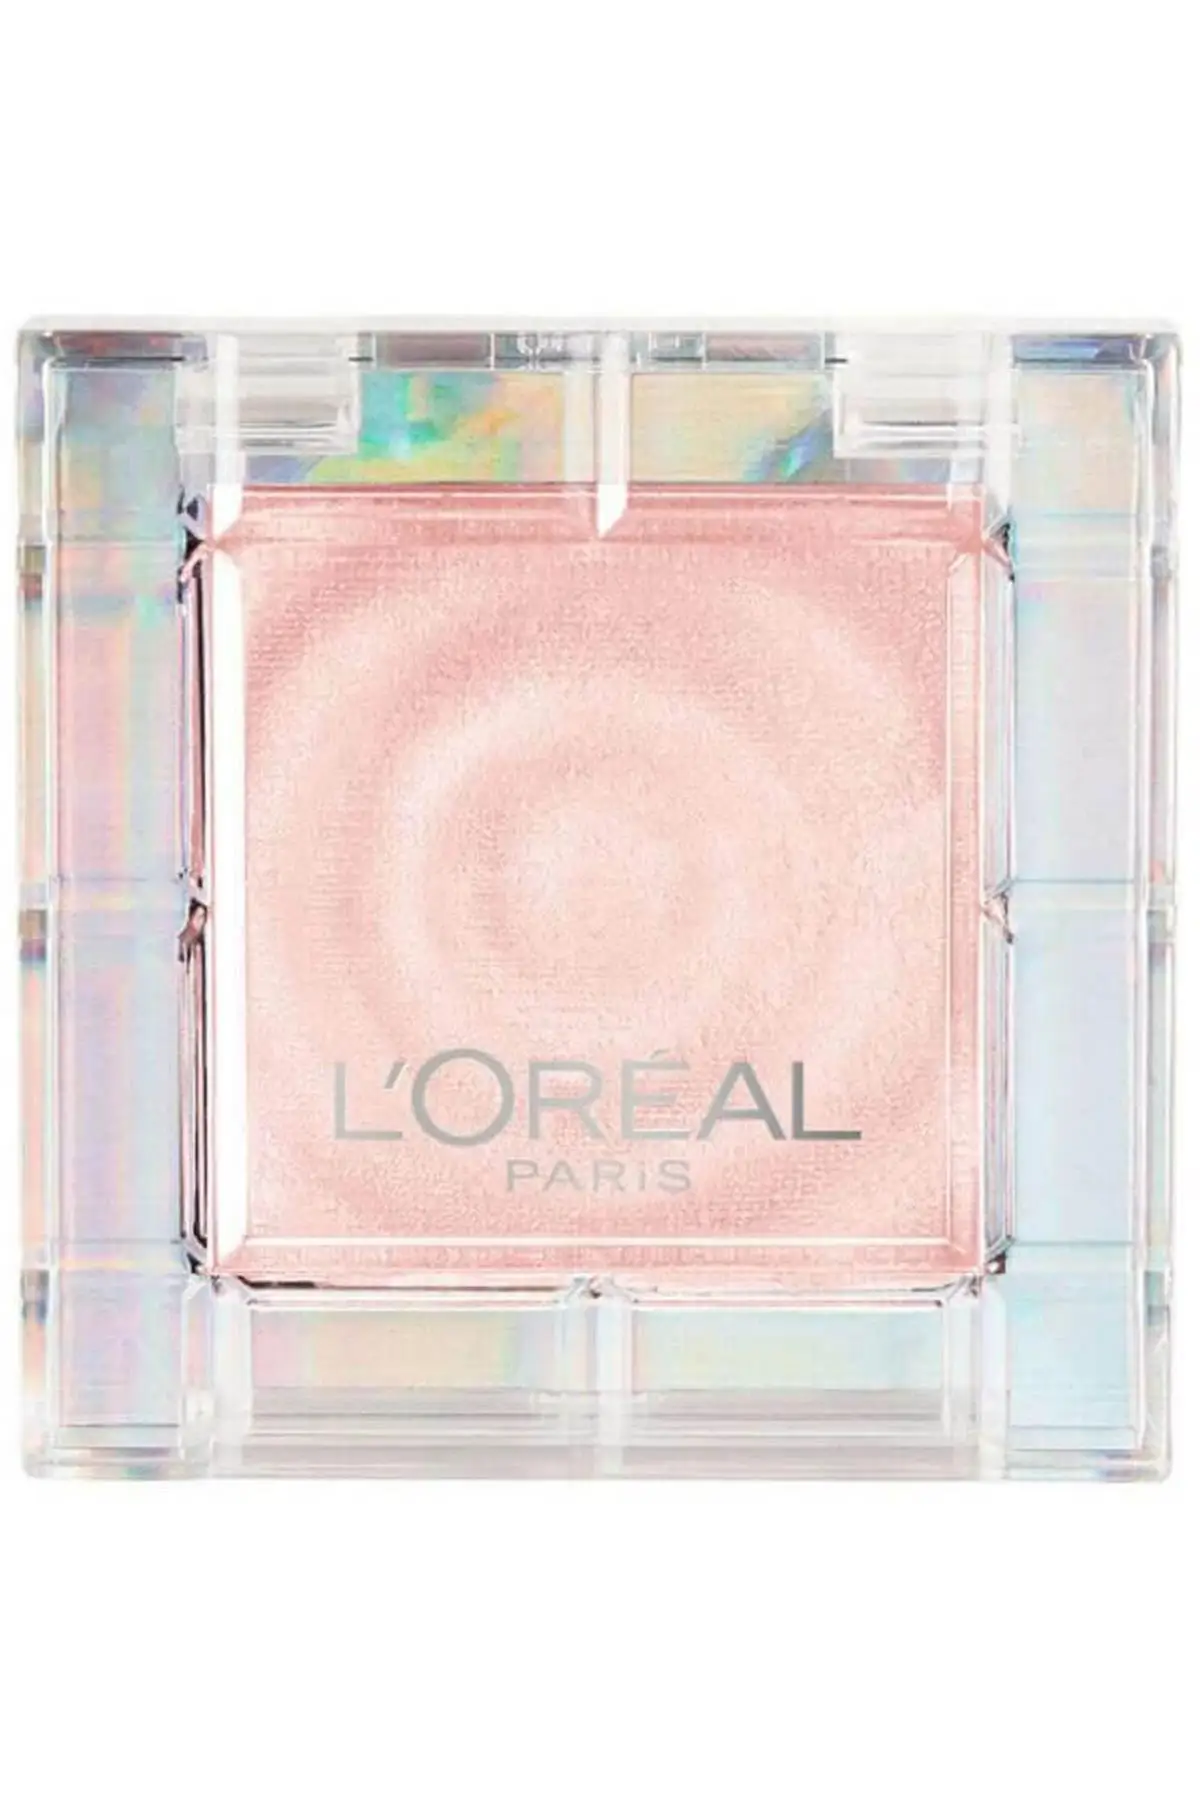 

Brand: L'Oreal Paris Color Queen Single Eye Shadow 01 Unsurpassed Category: Eye Shadow